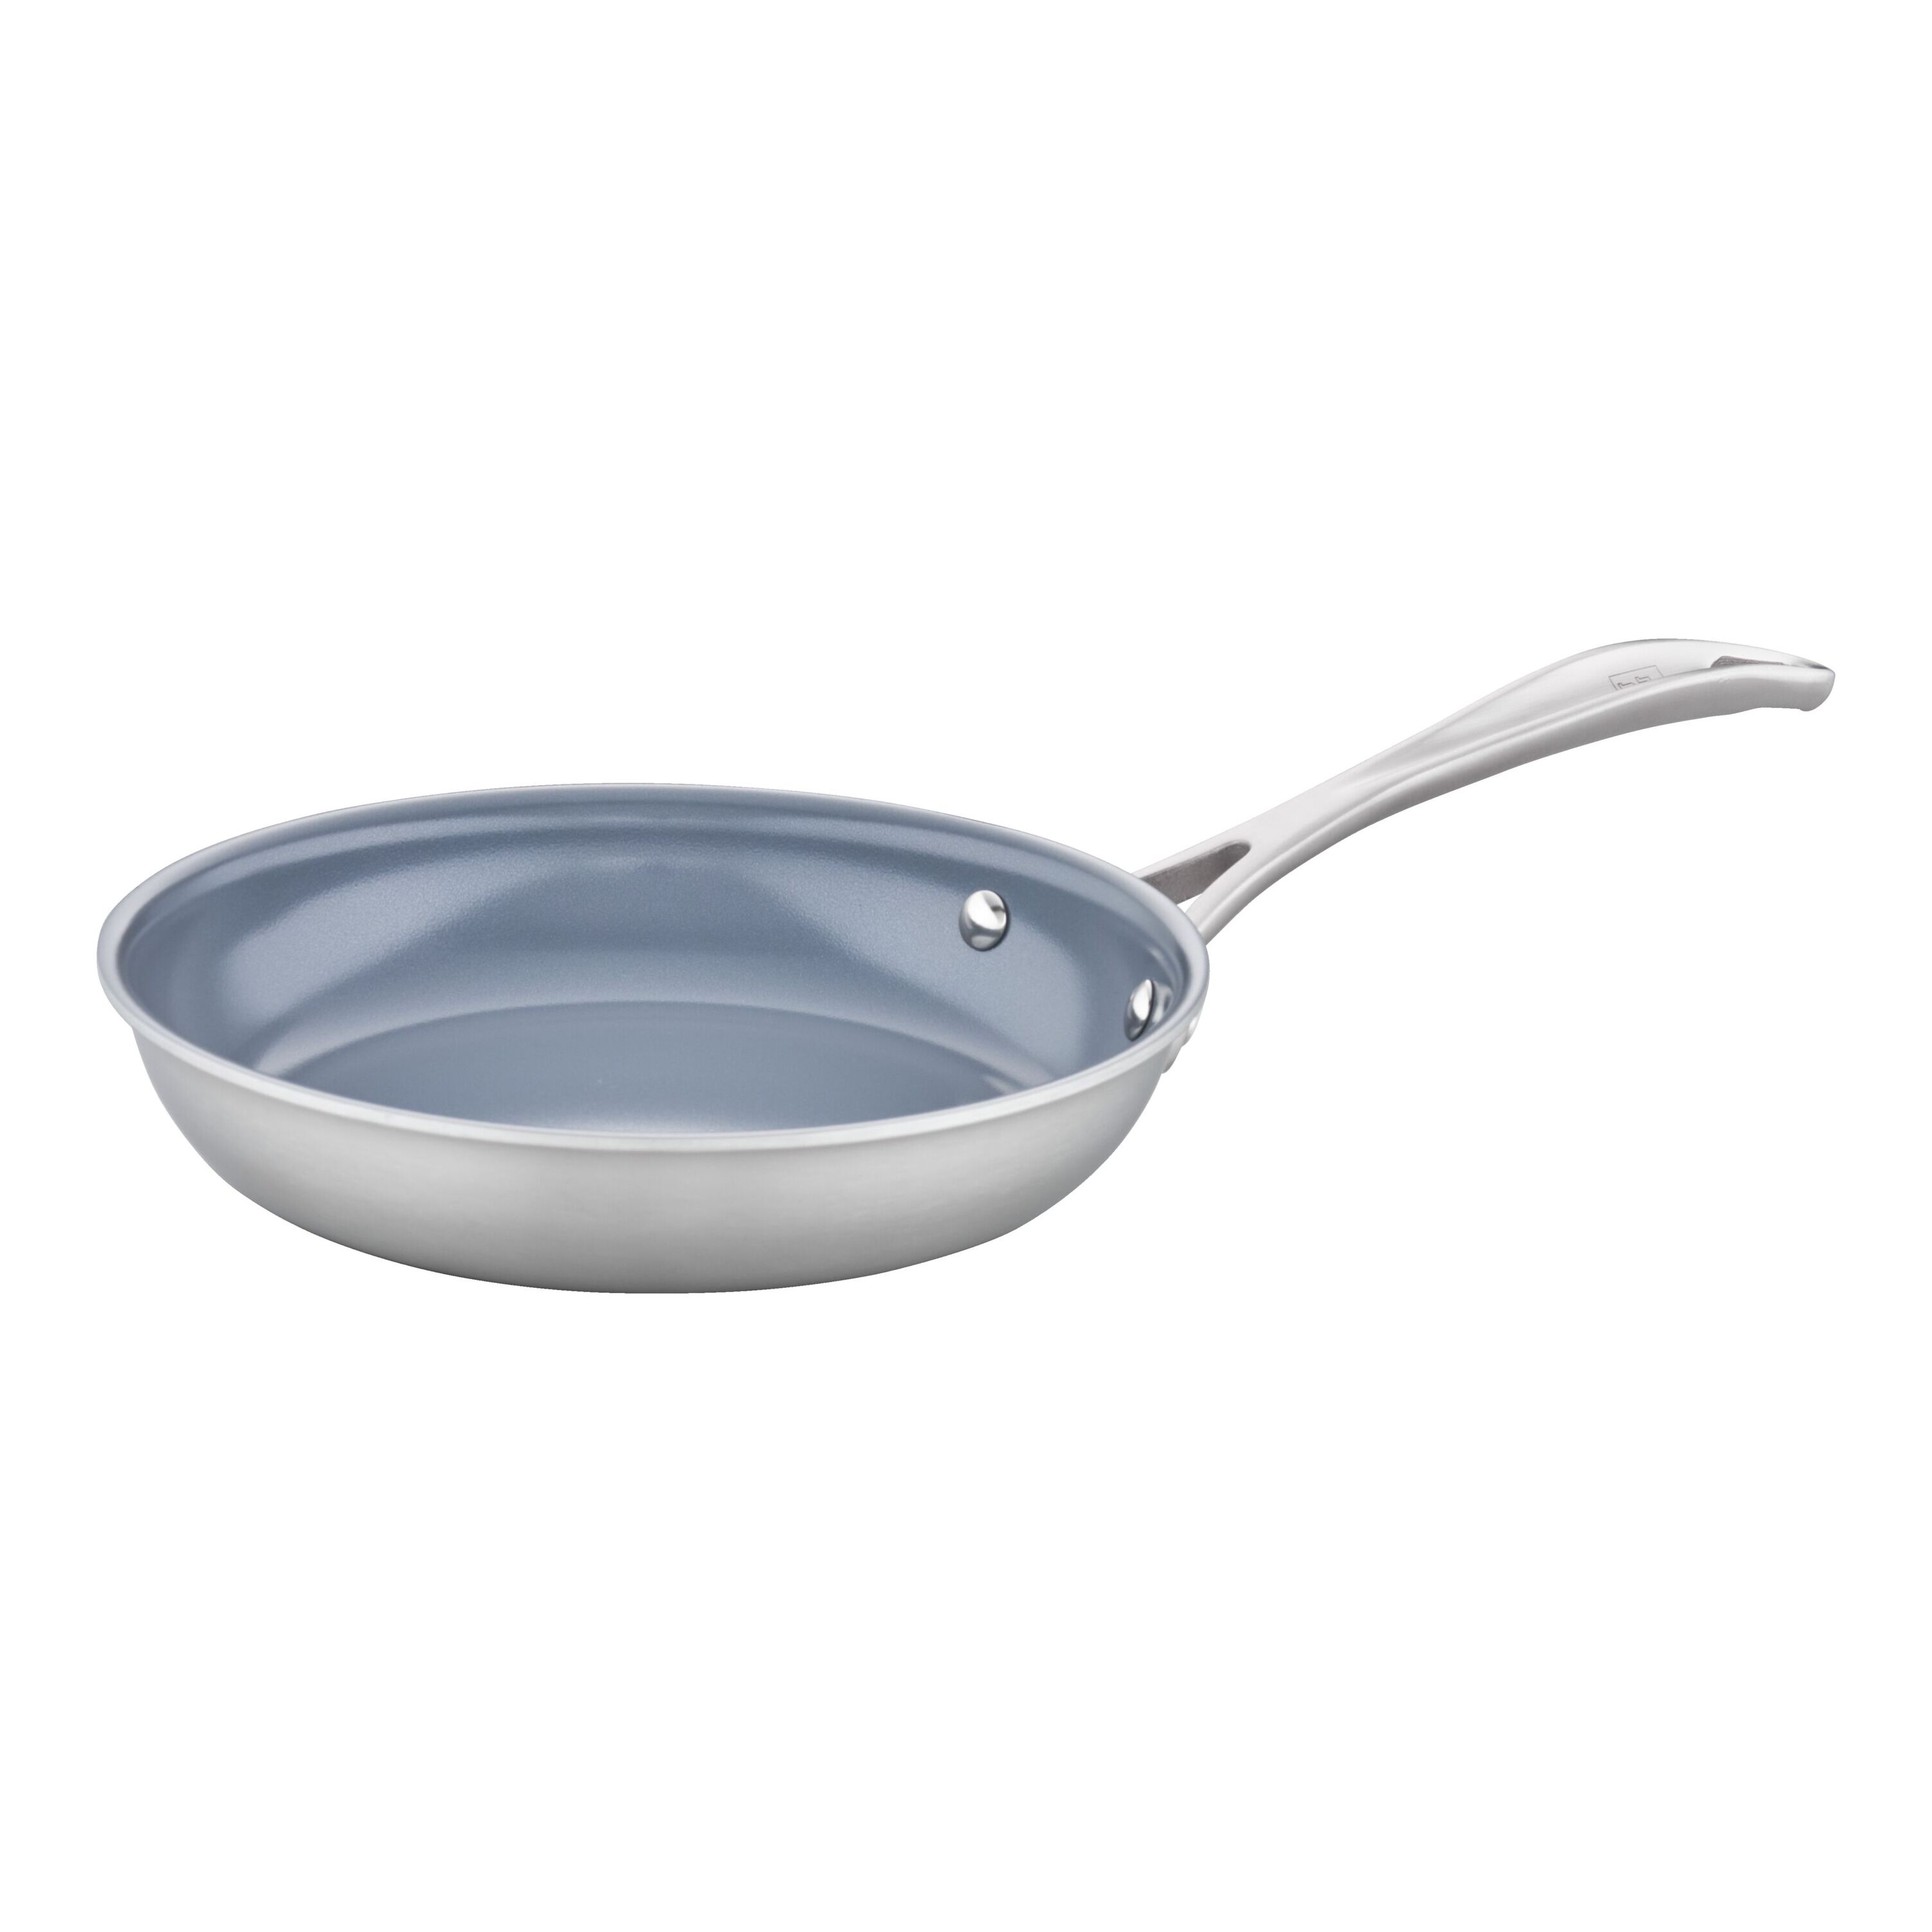 Zwilling Spirit Ceramic Nonstick 14-Inch, 18/10 Stainless Steel, Non-Stick, Frying Pan